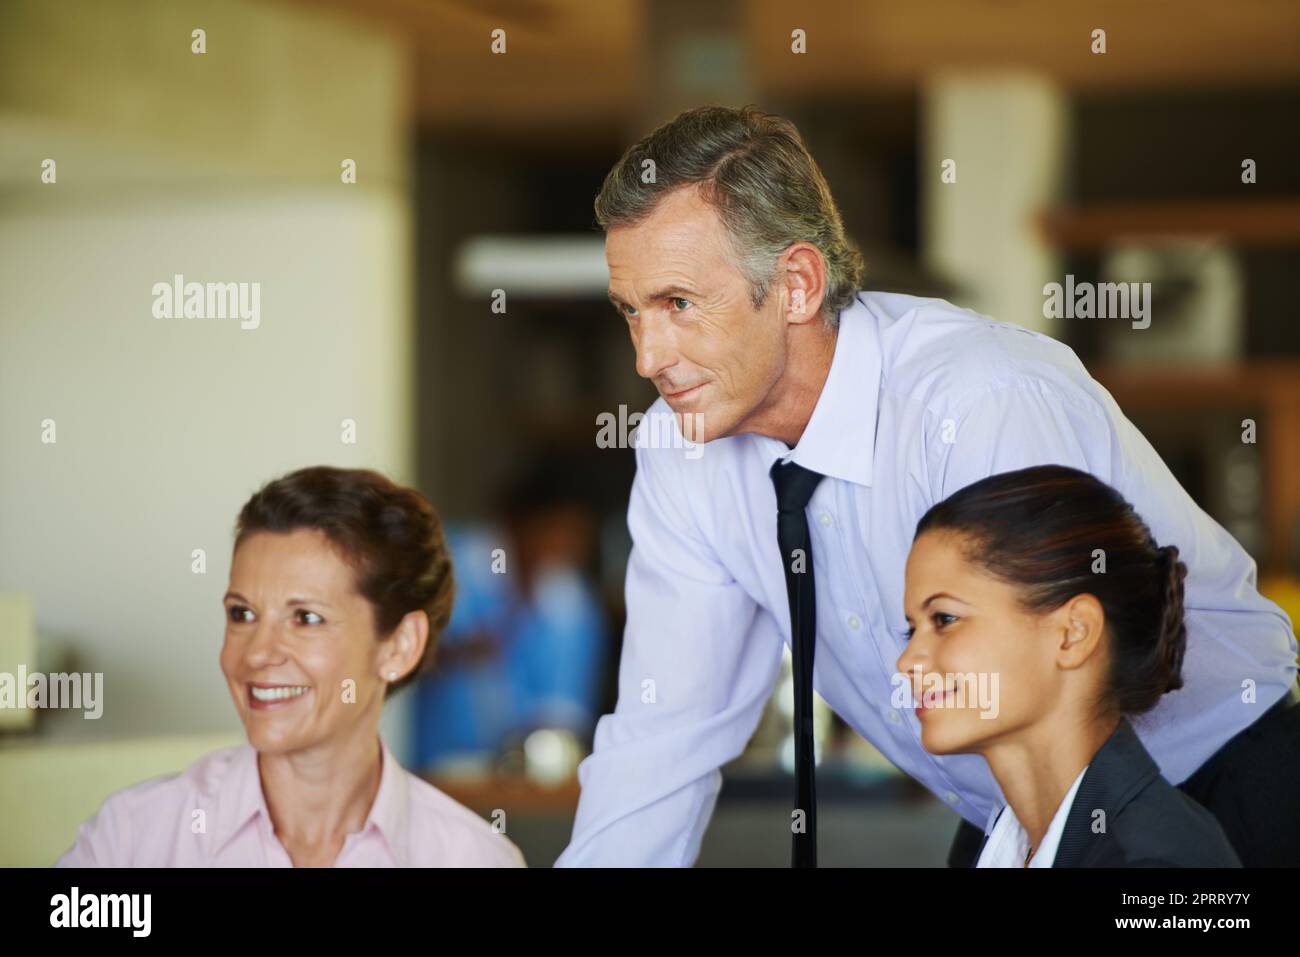 Gaining valuable corporate insight. Three coworkers together in a meeting. Stock Photo